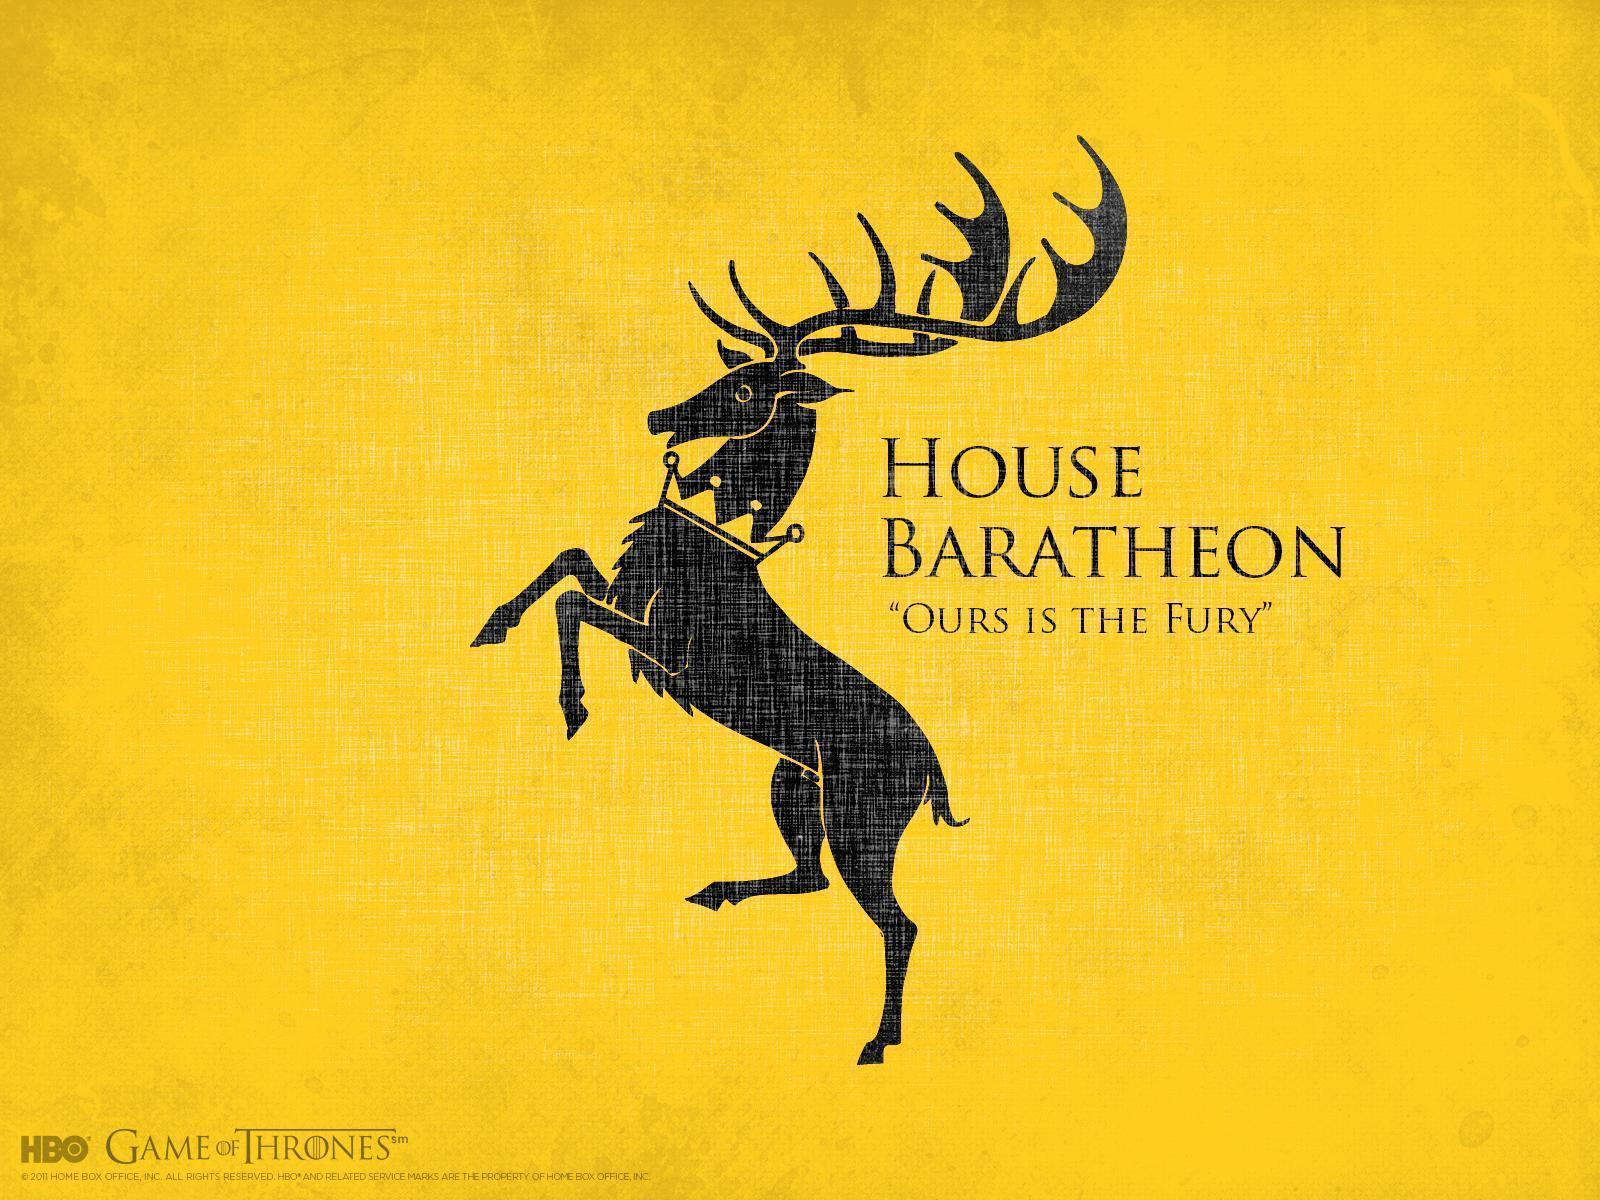 HBO Game of Thrones Wallpaper Free HBO Game